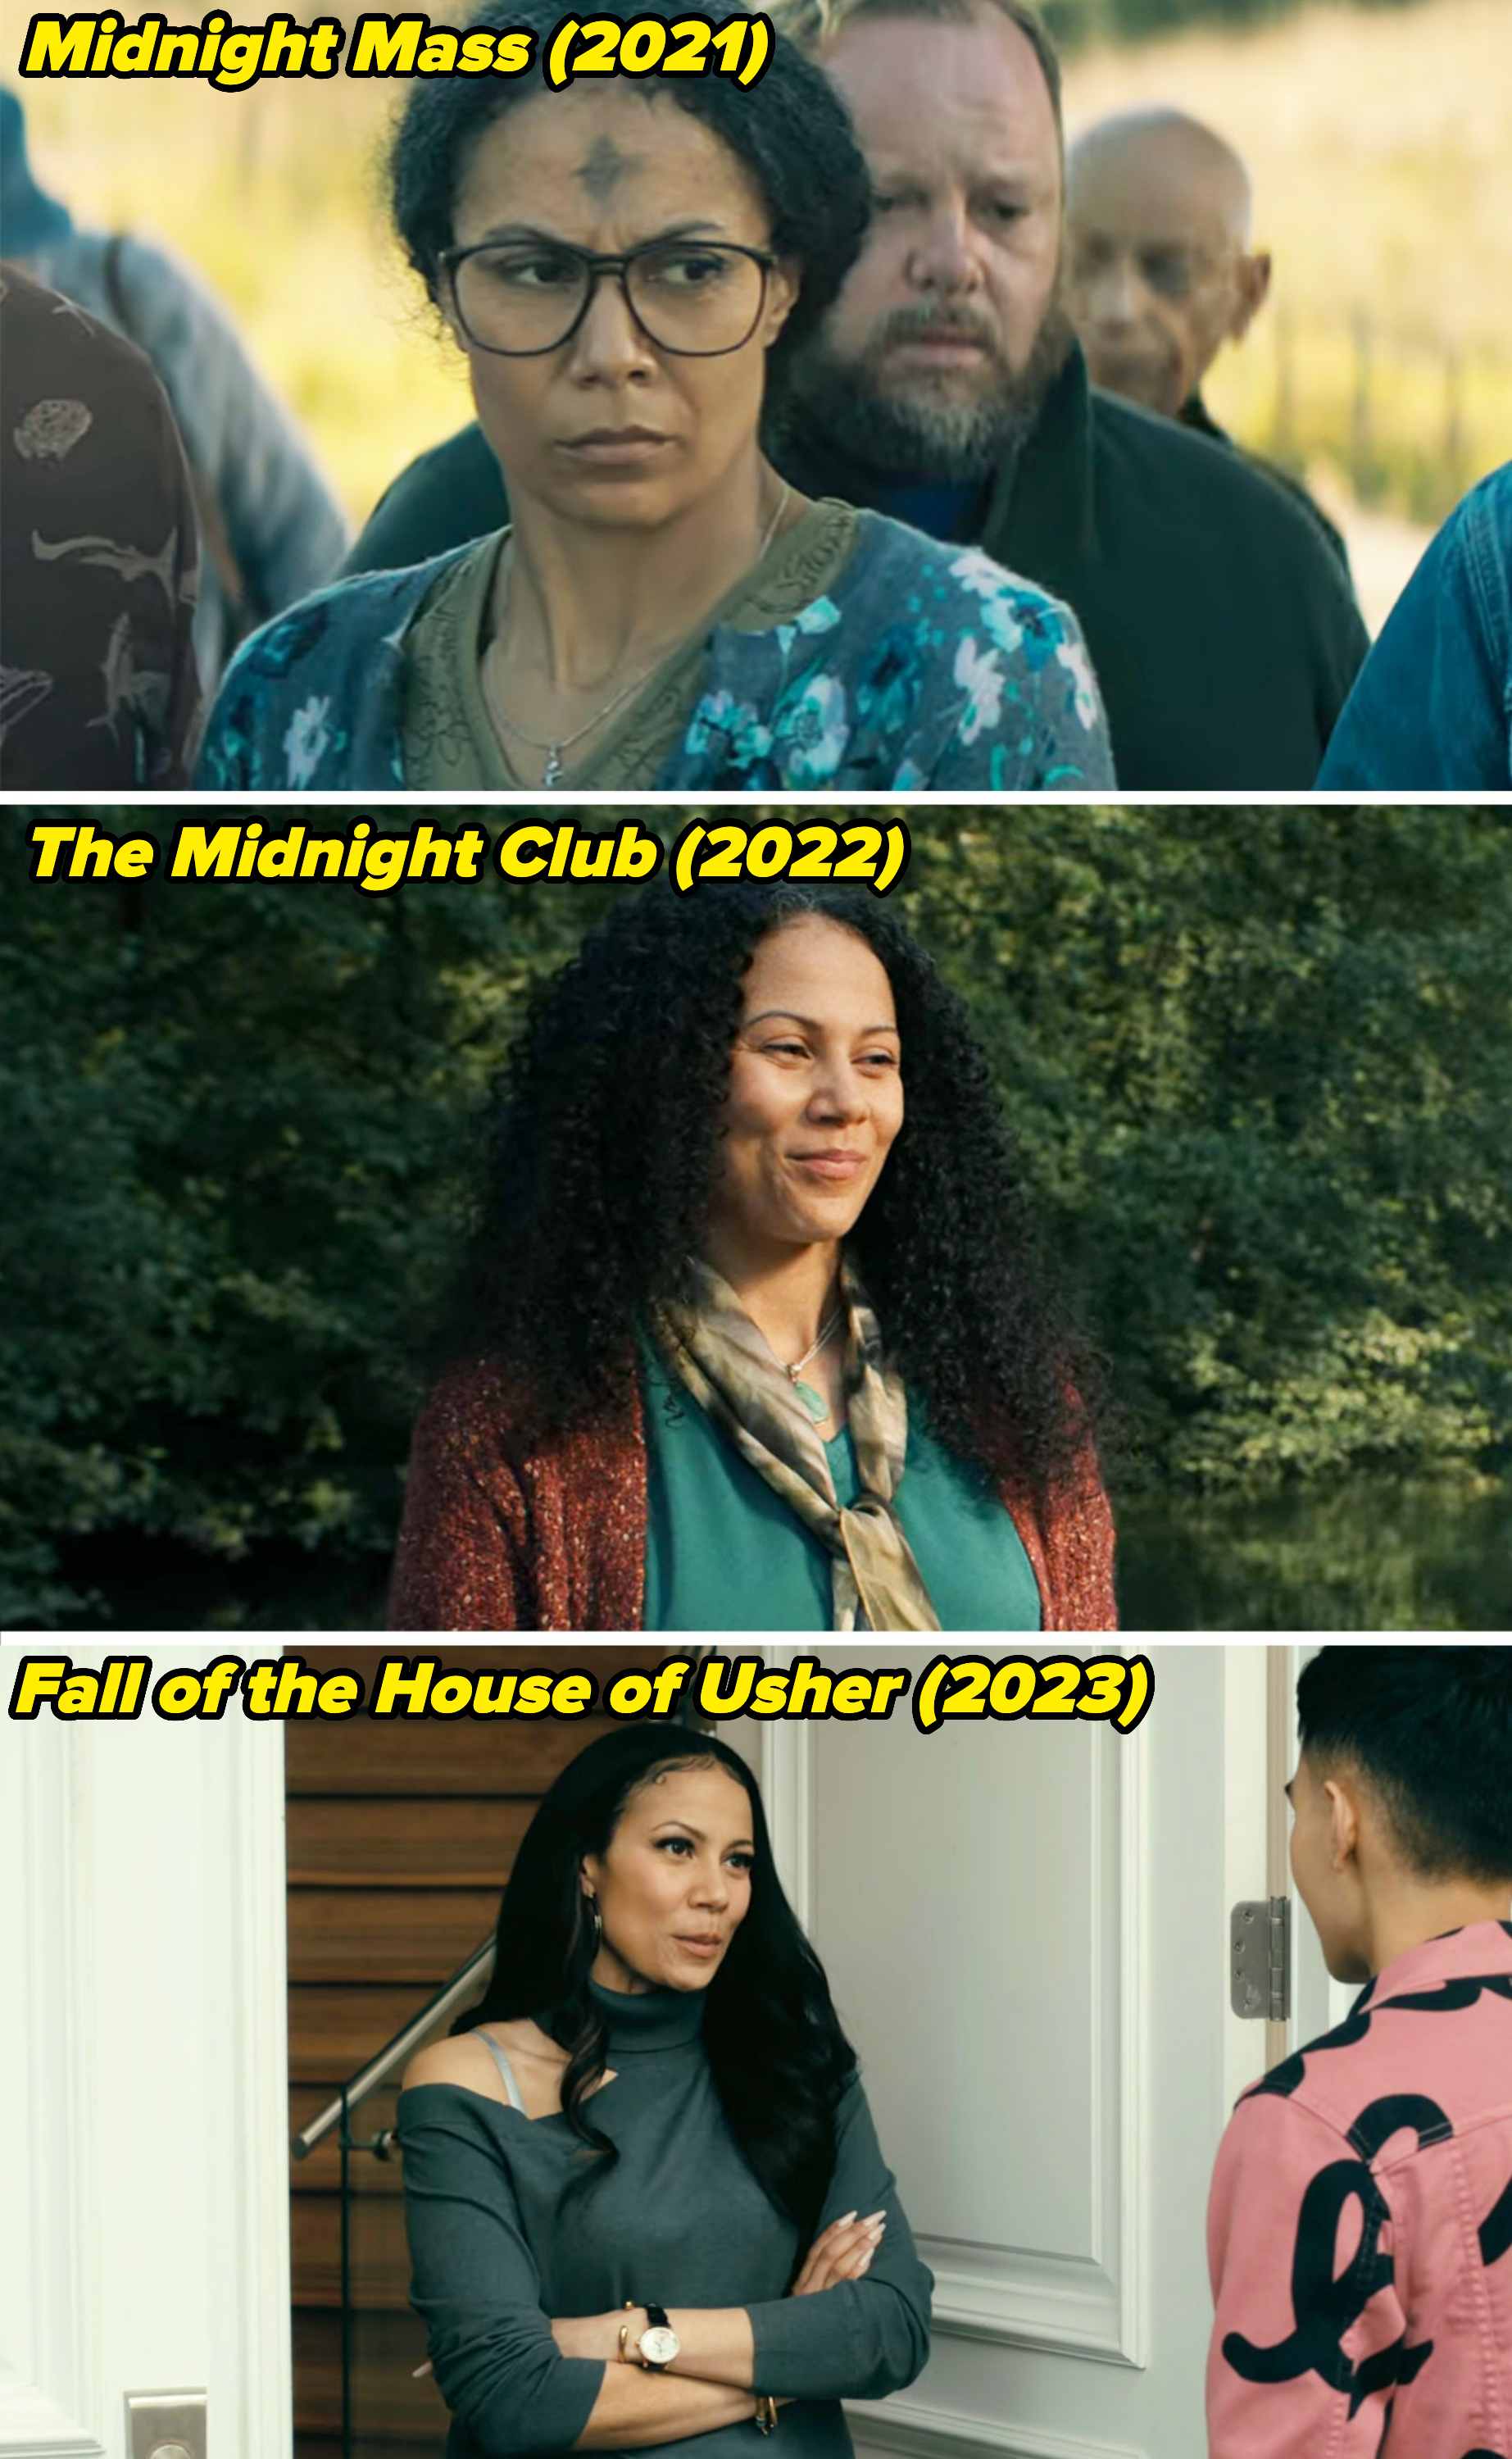 Crystal Balint in multiple roles